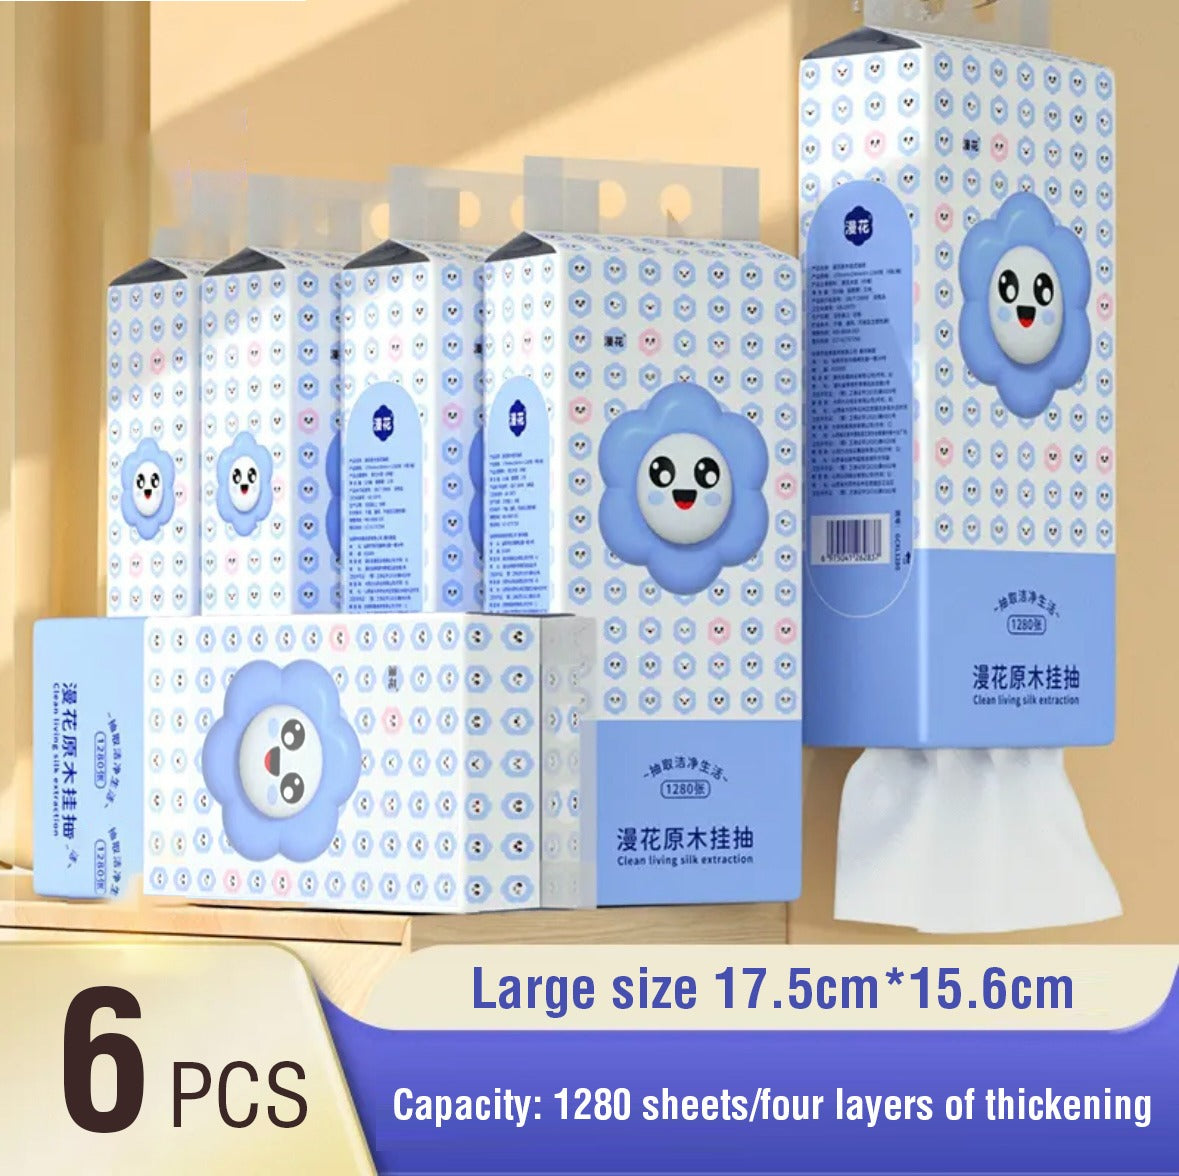 Showcasing six sets of Wood Pulp Tissue Papers with its details 